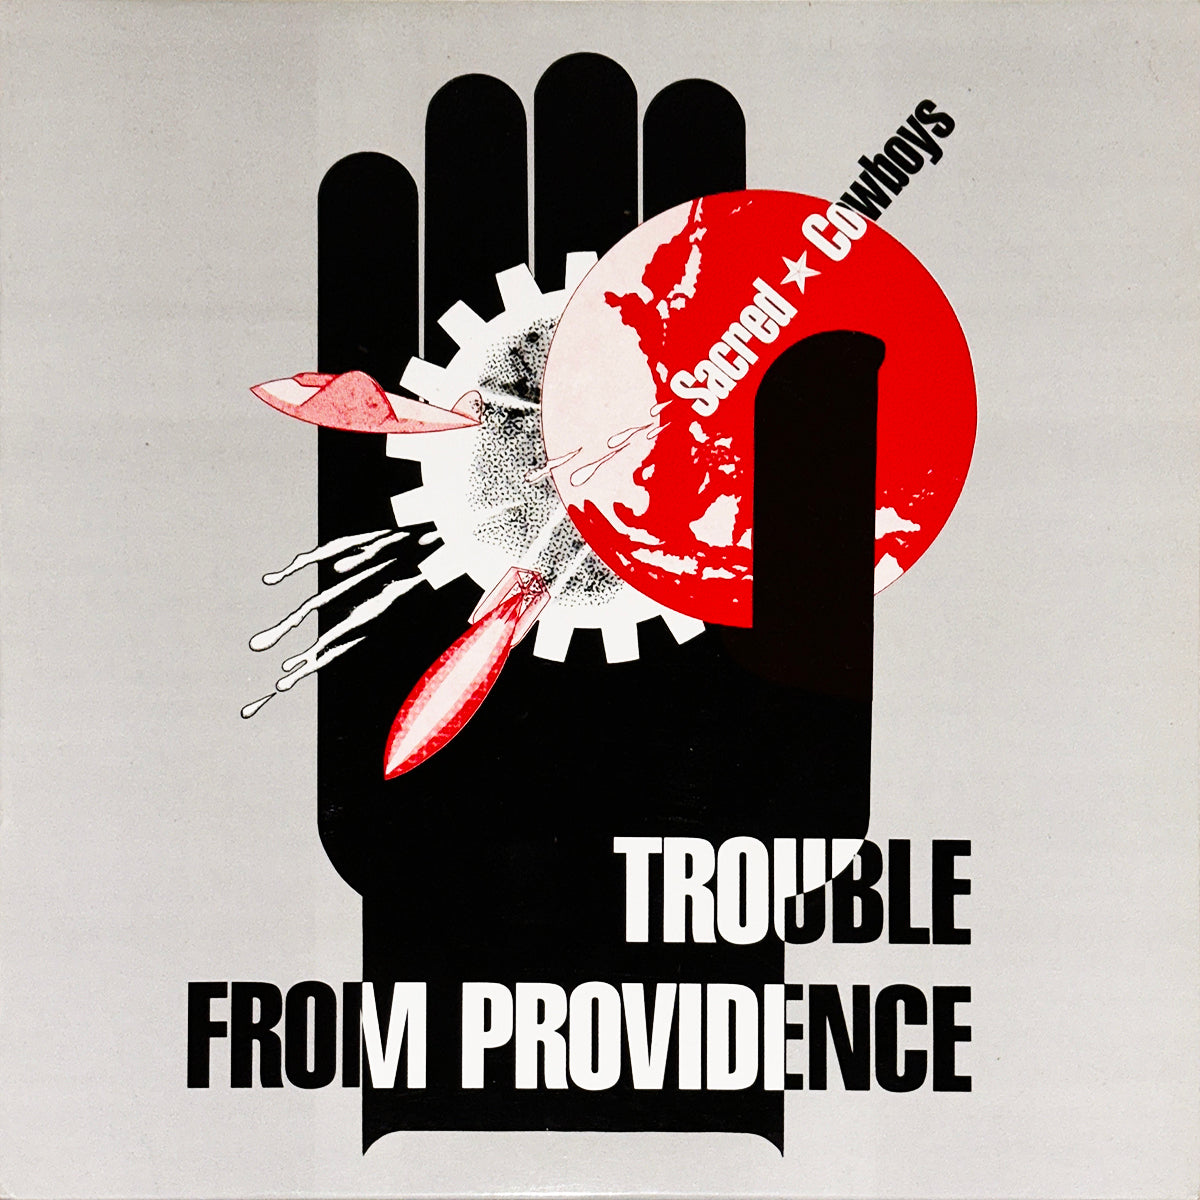 Trouble From Providence